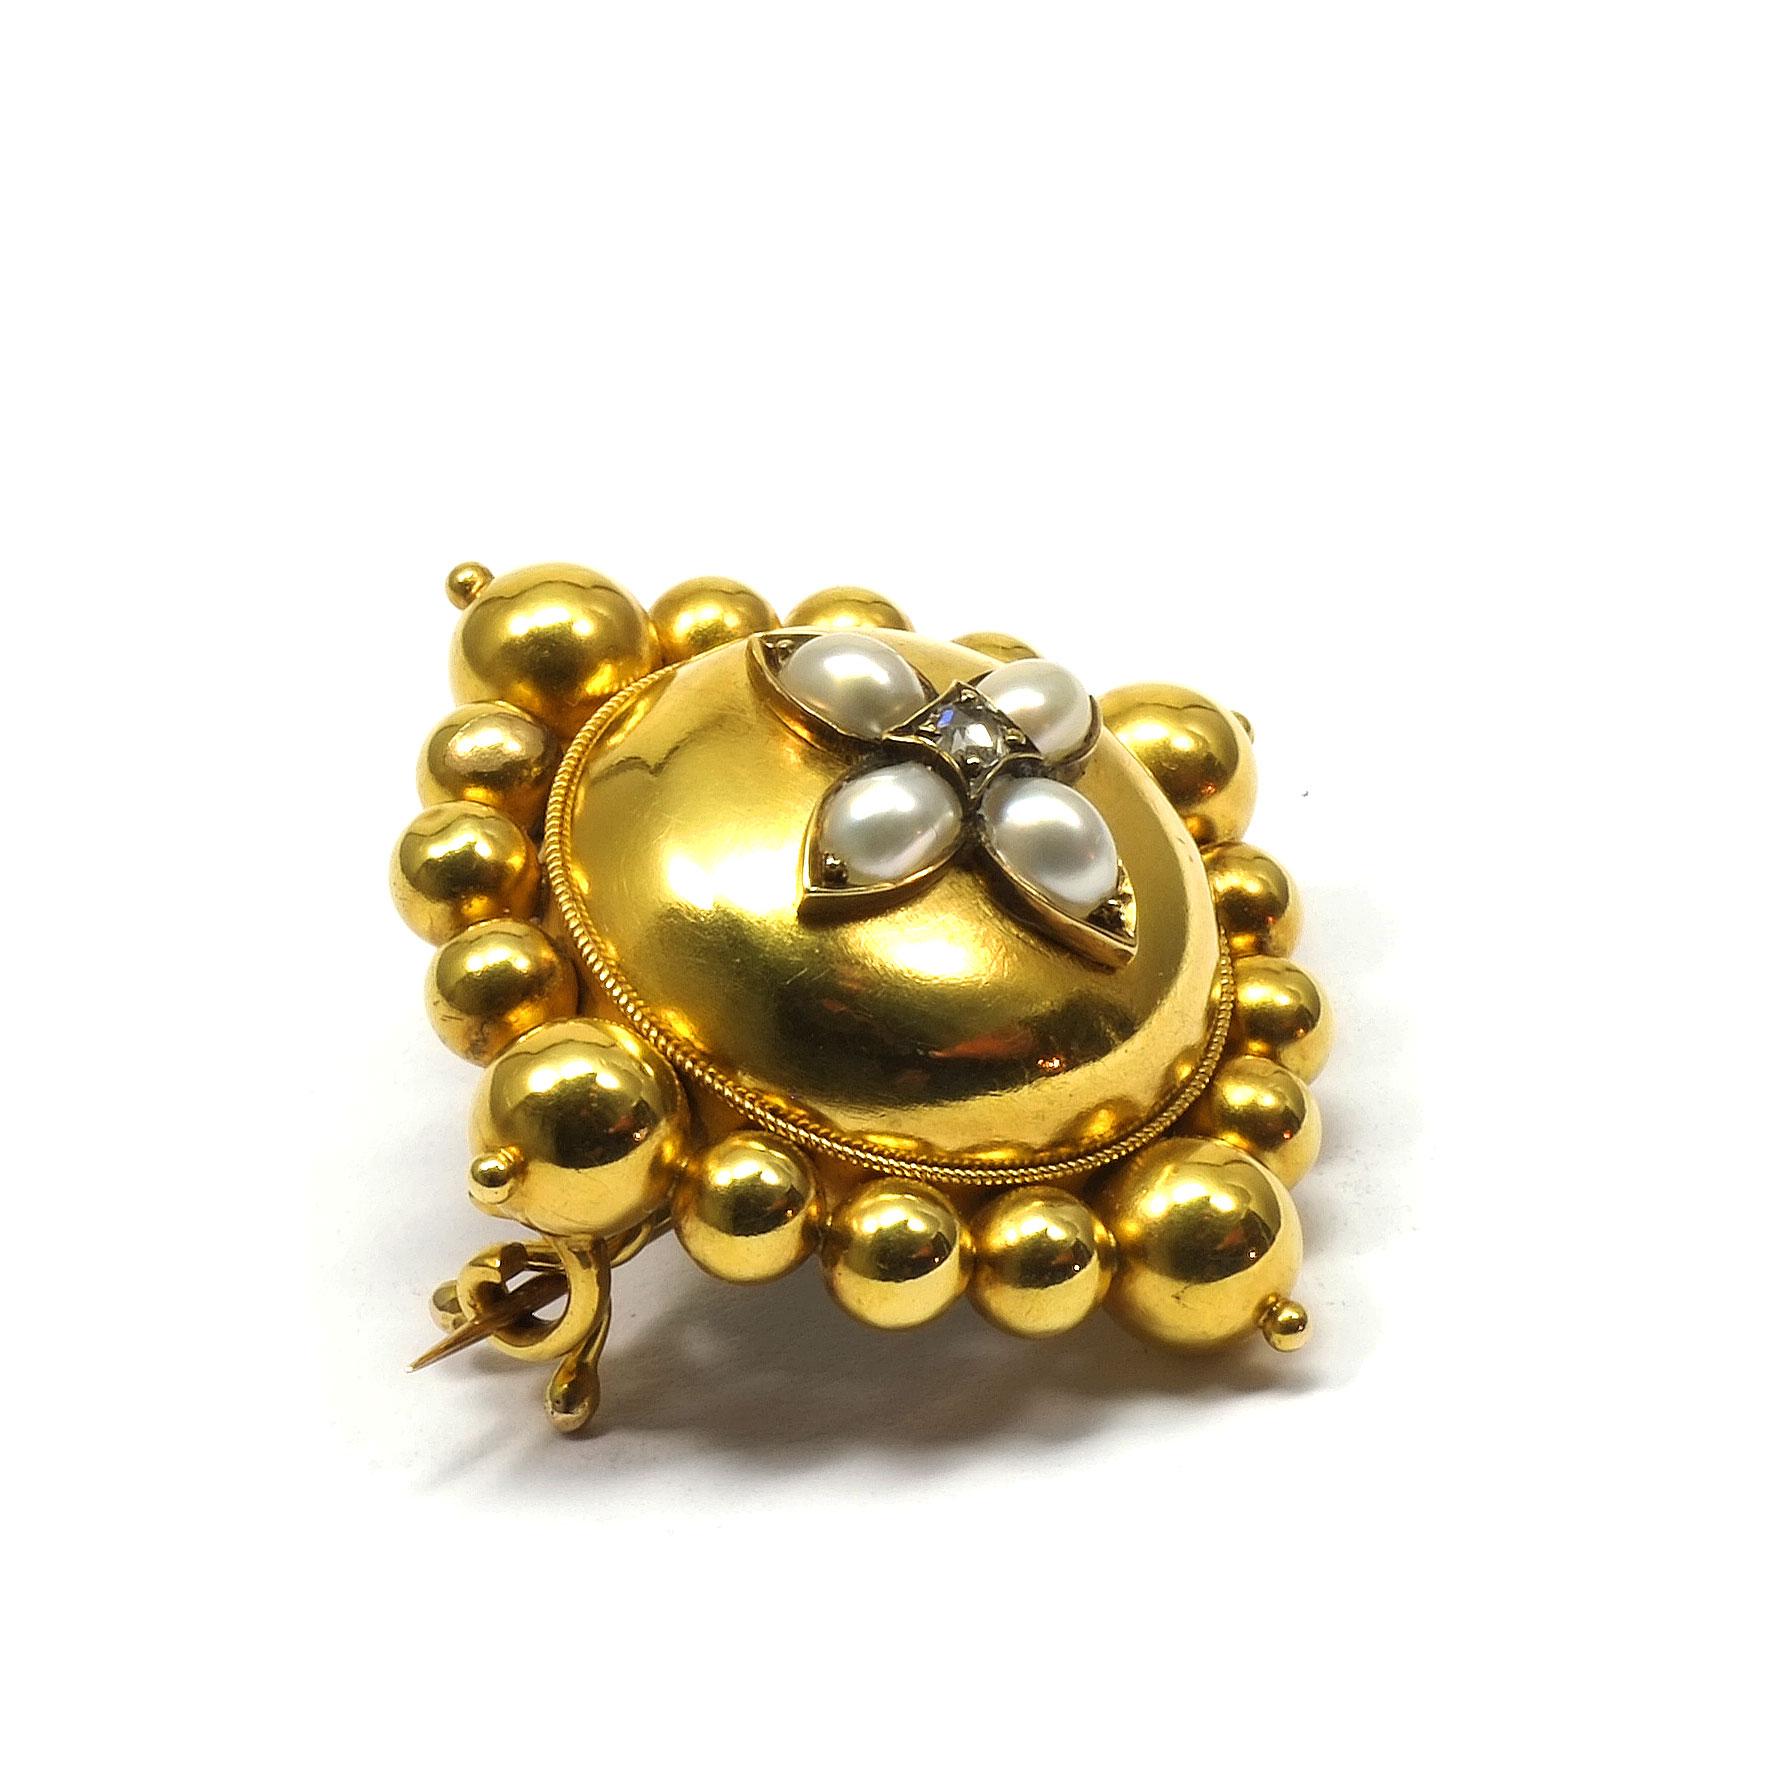 Victorian Pearl and Diamond 18K Gold Brooch circa 1840

Very decorative brooch made of embossed gold, the center worked as a hemisphere and star-shaped with four pearls and a radiant rose-cut diamond, in a setting of gold balls lined up next to each